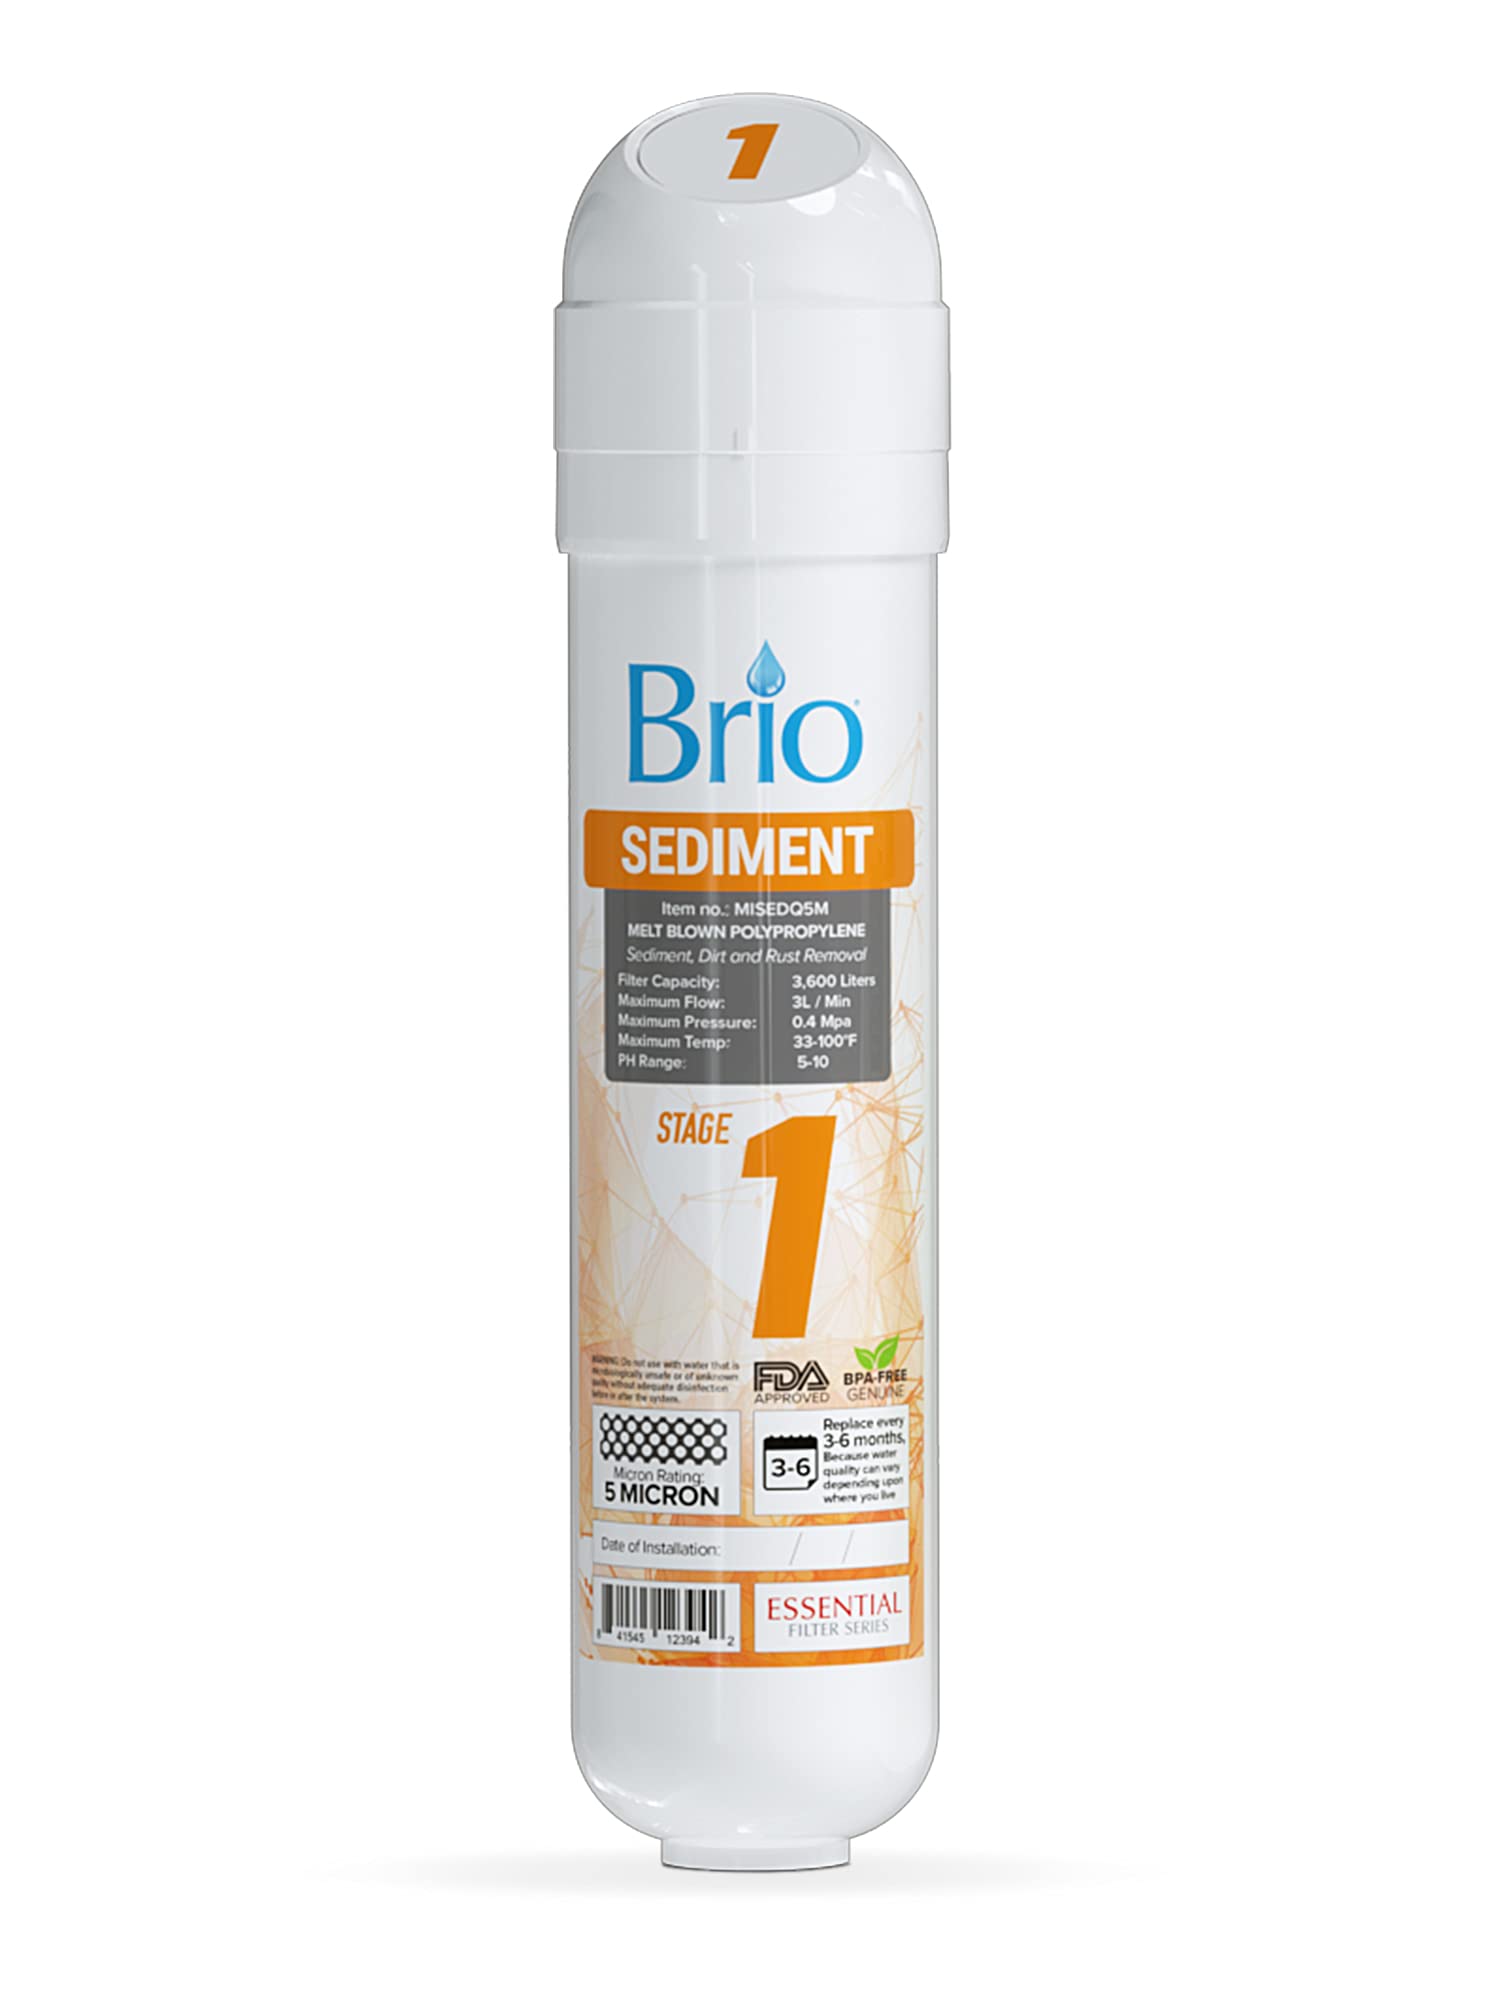 Brio Water Cooler Filter Replacement - Stage-1: Melt-Blown Polypropylene Sediment - for Brio model CLPOUROSC420RO